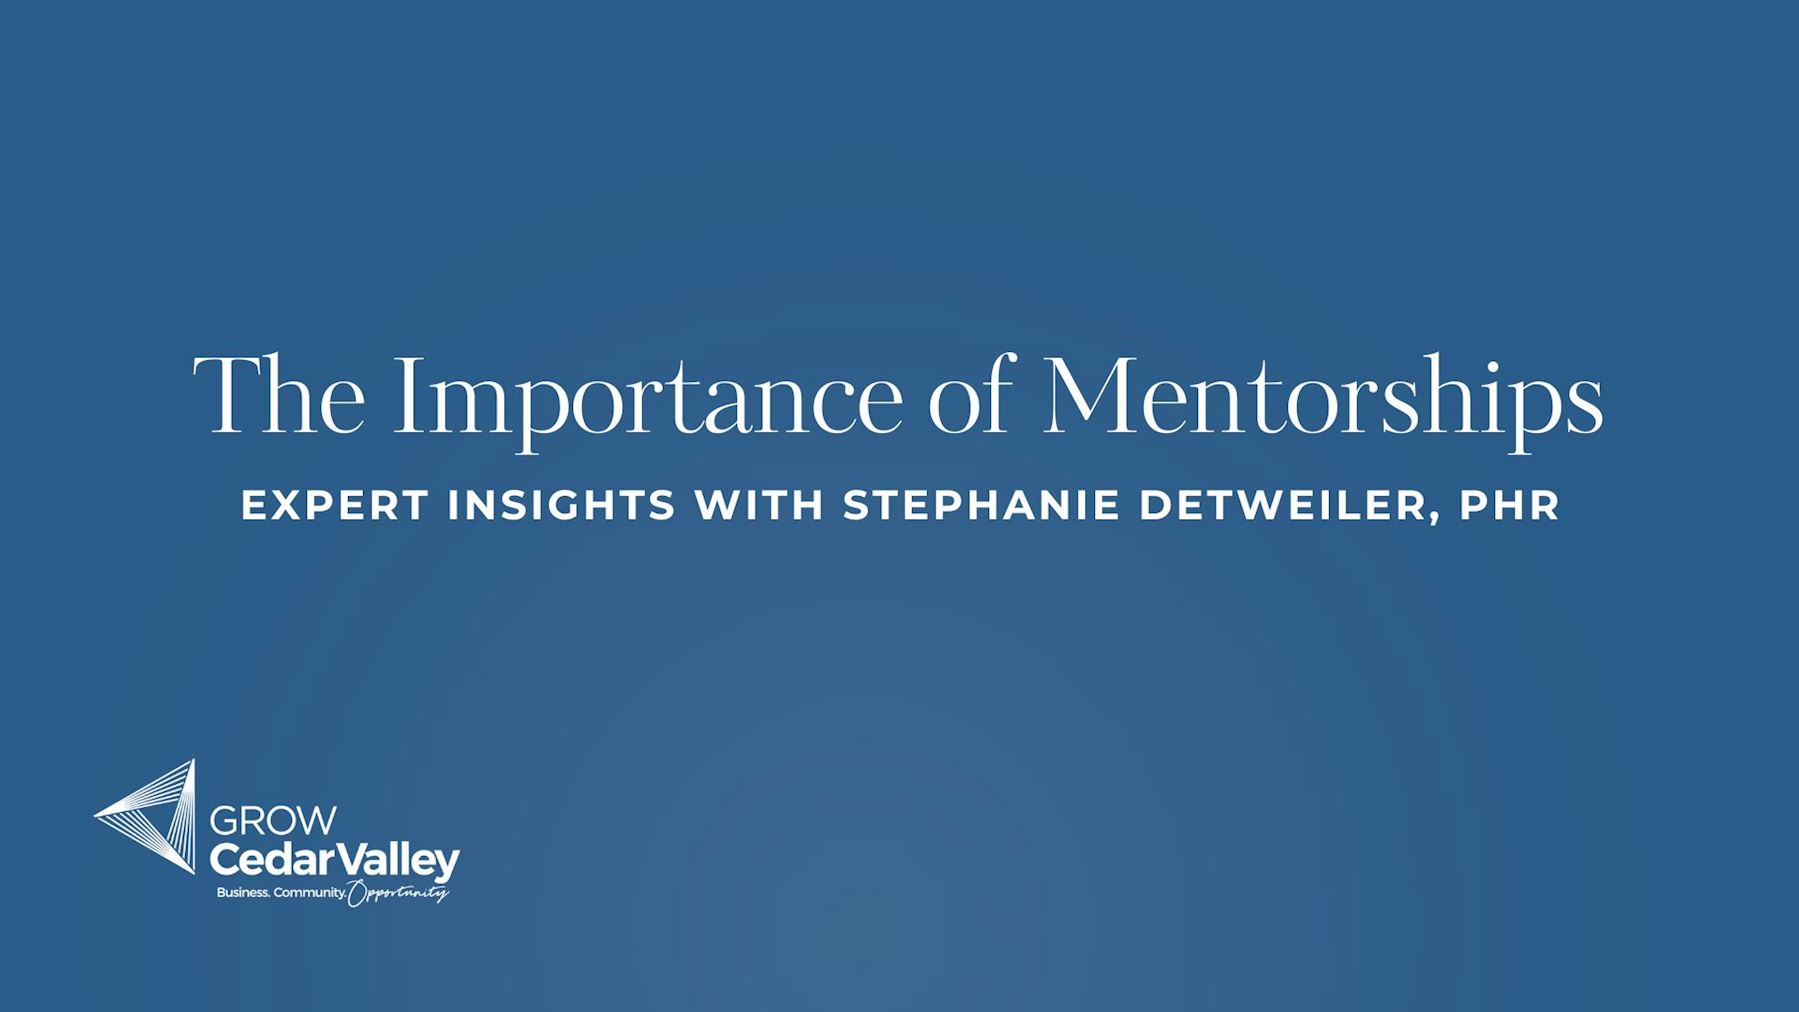 The Importance of Mentorships